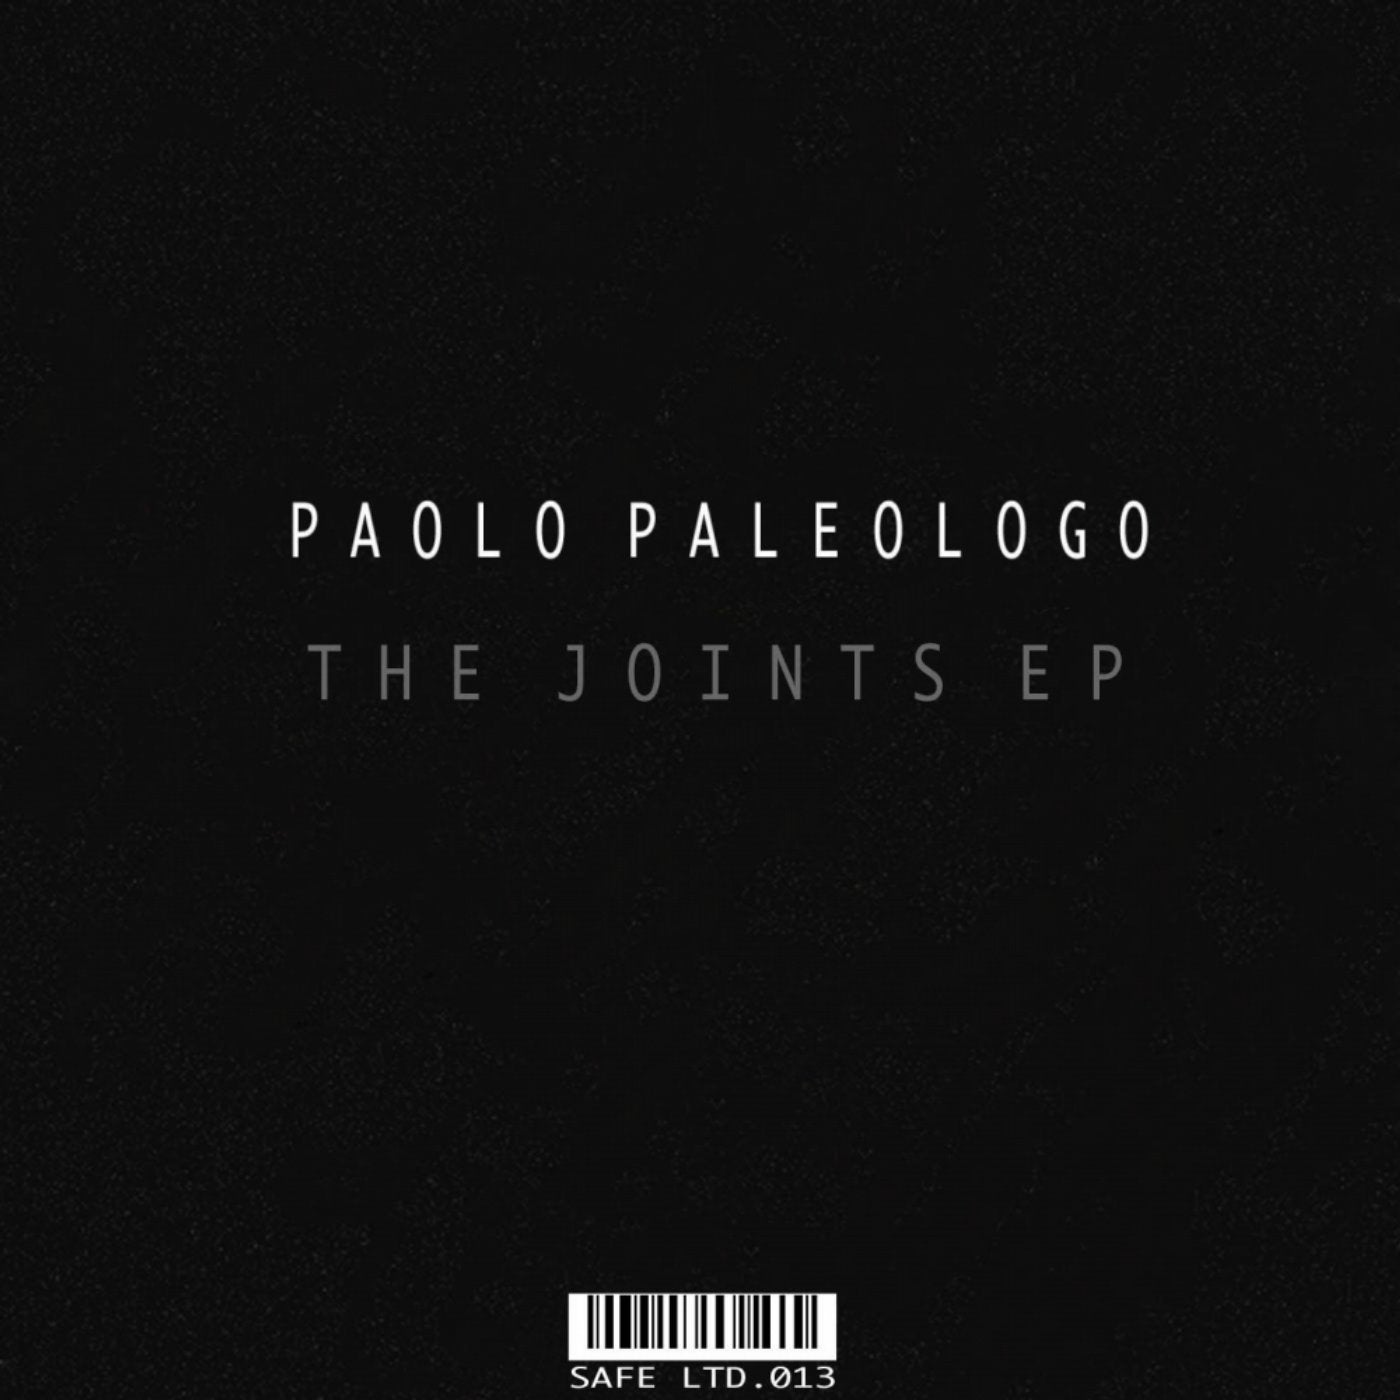 The Joints EP